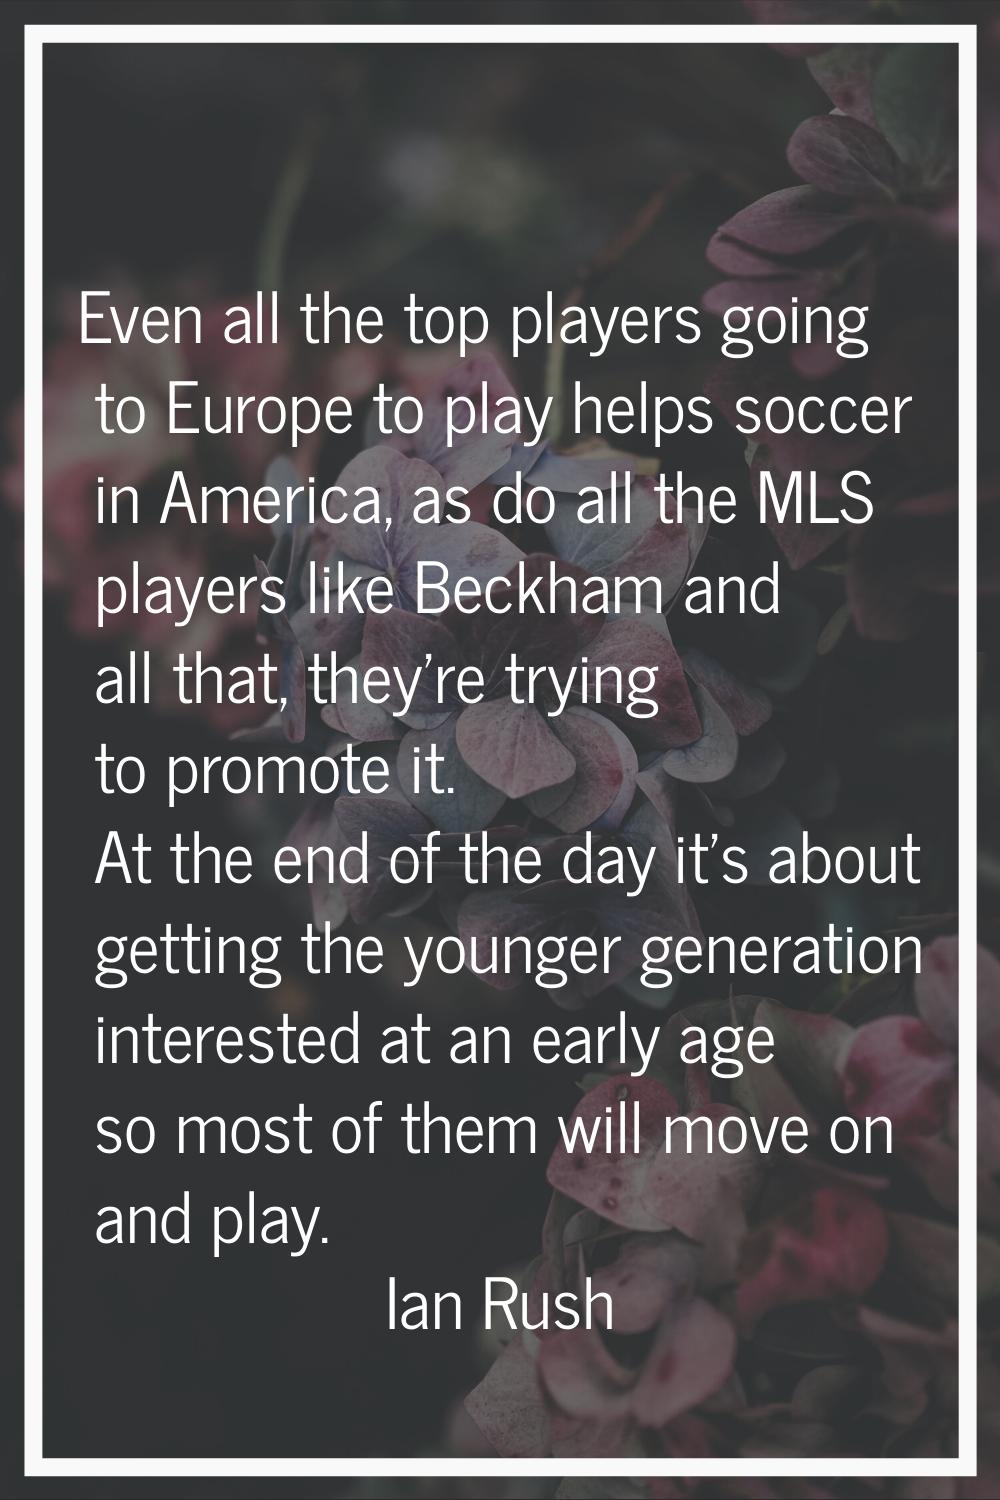 Even all the top players going to Europe to play helps soccer in America, as do all the MLS players